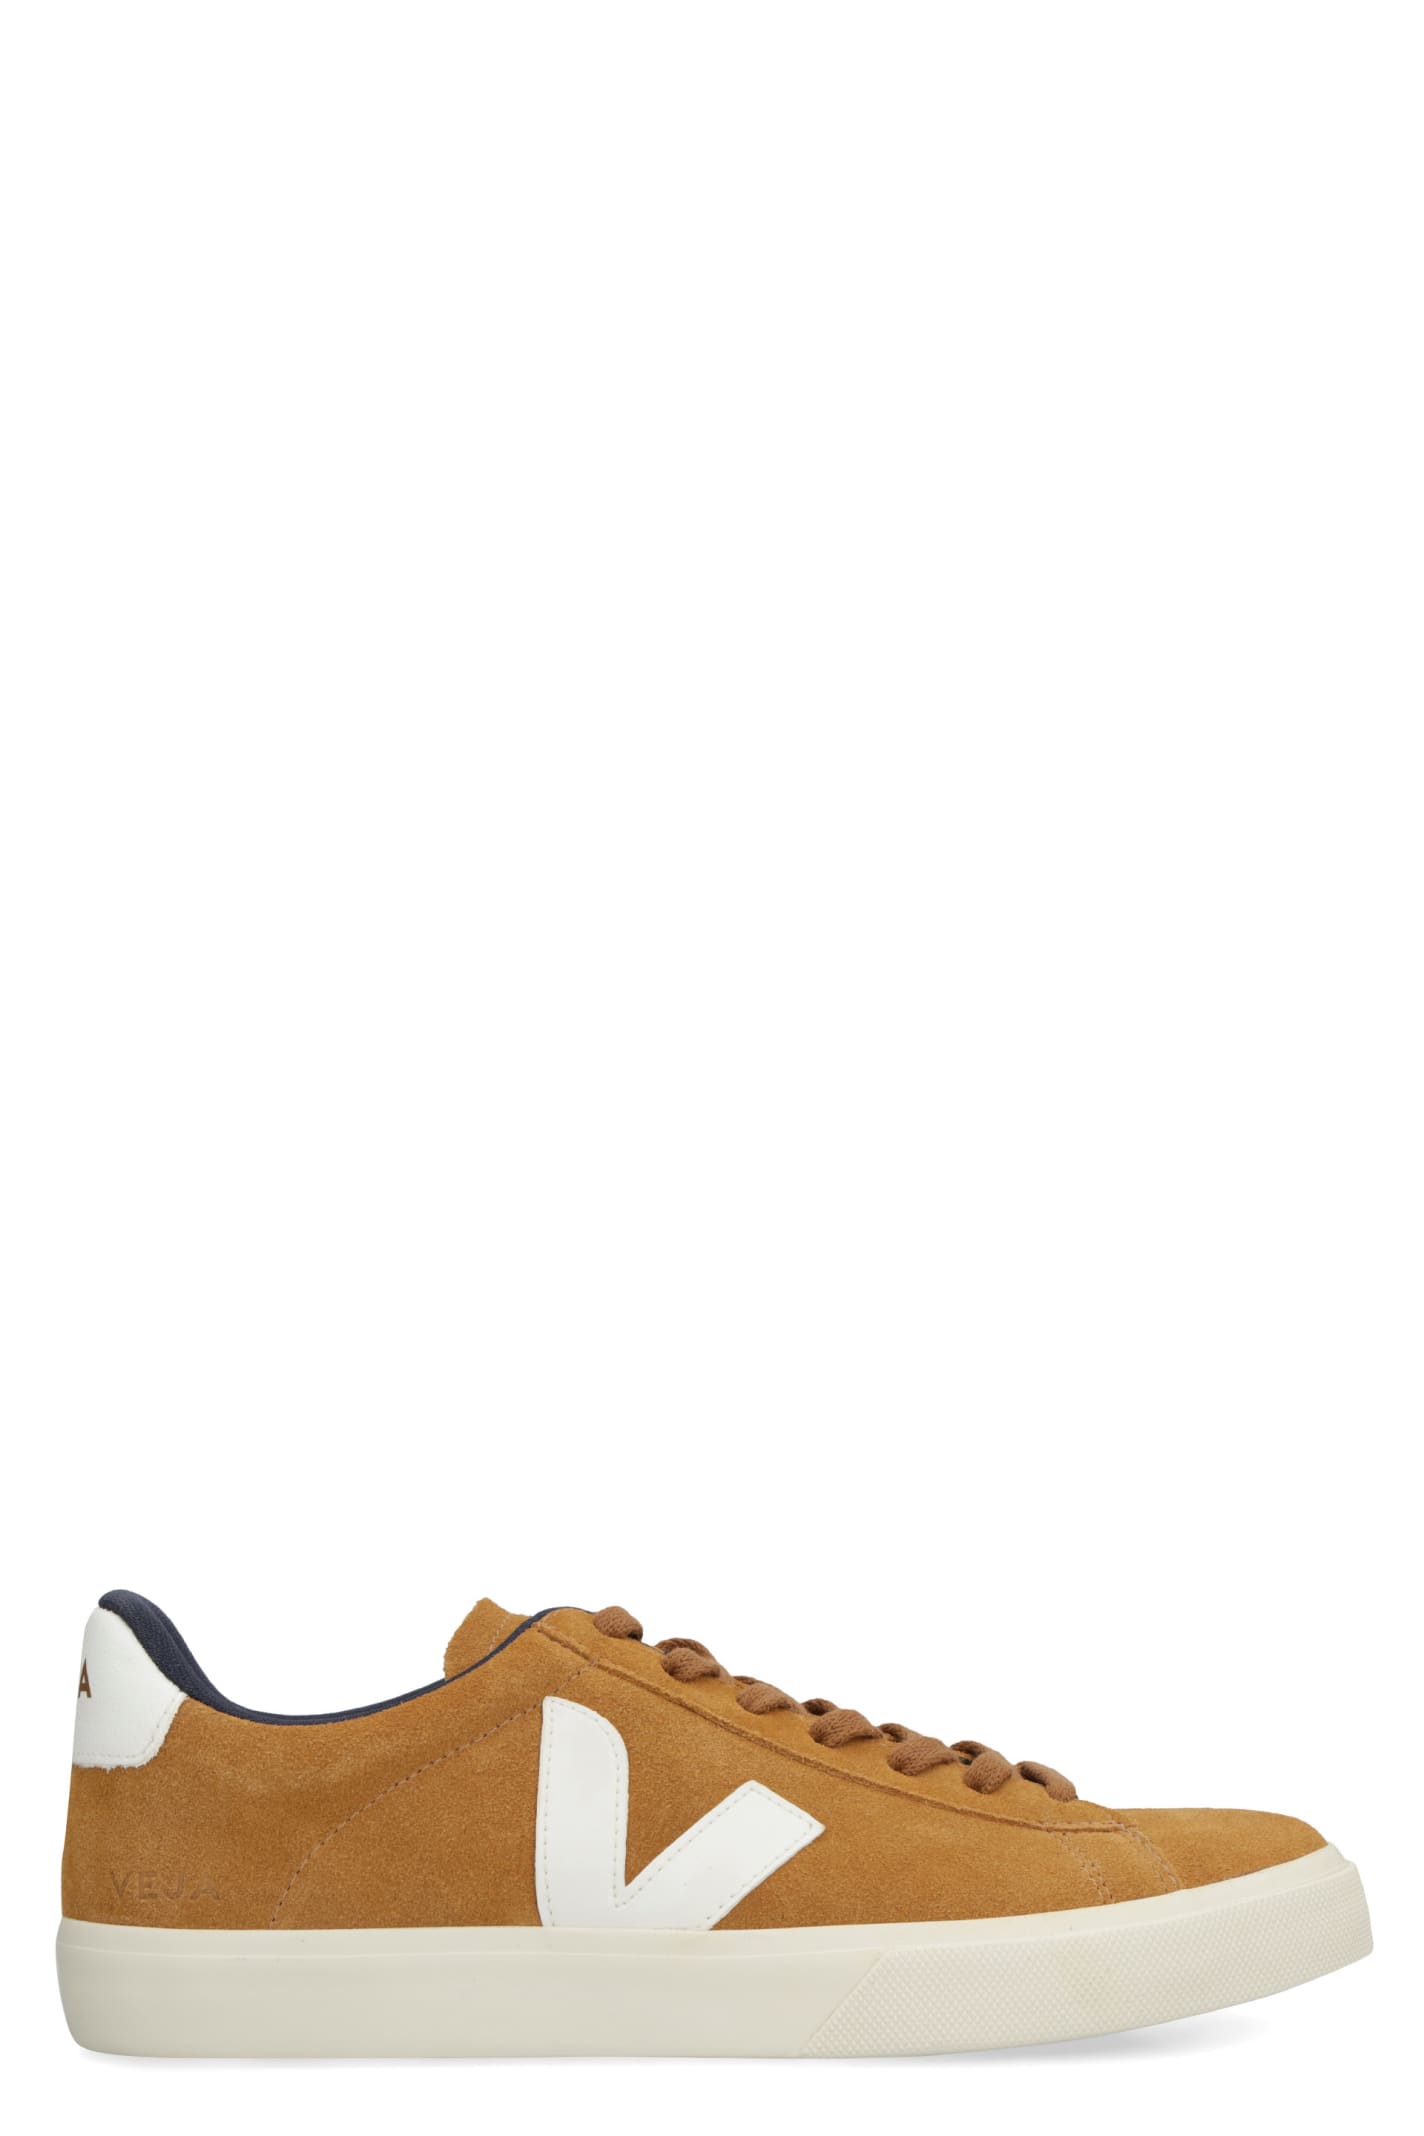 VEJA CAMPO LEATHER LOW-TOP SNEAKERS